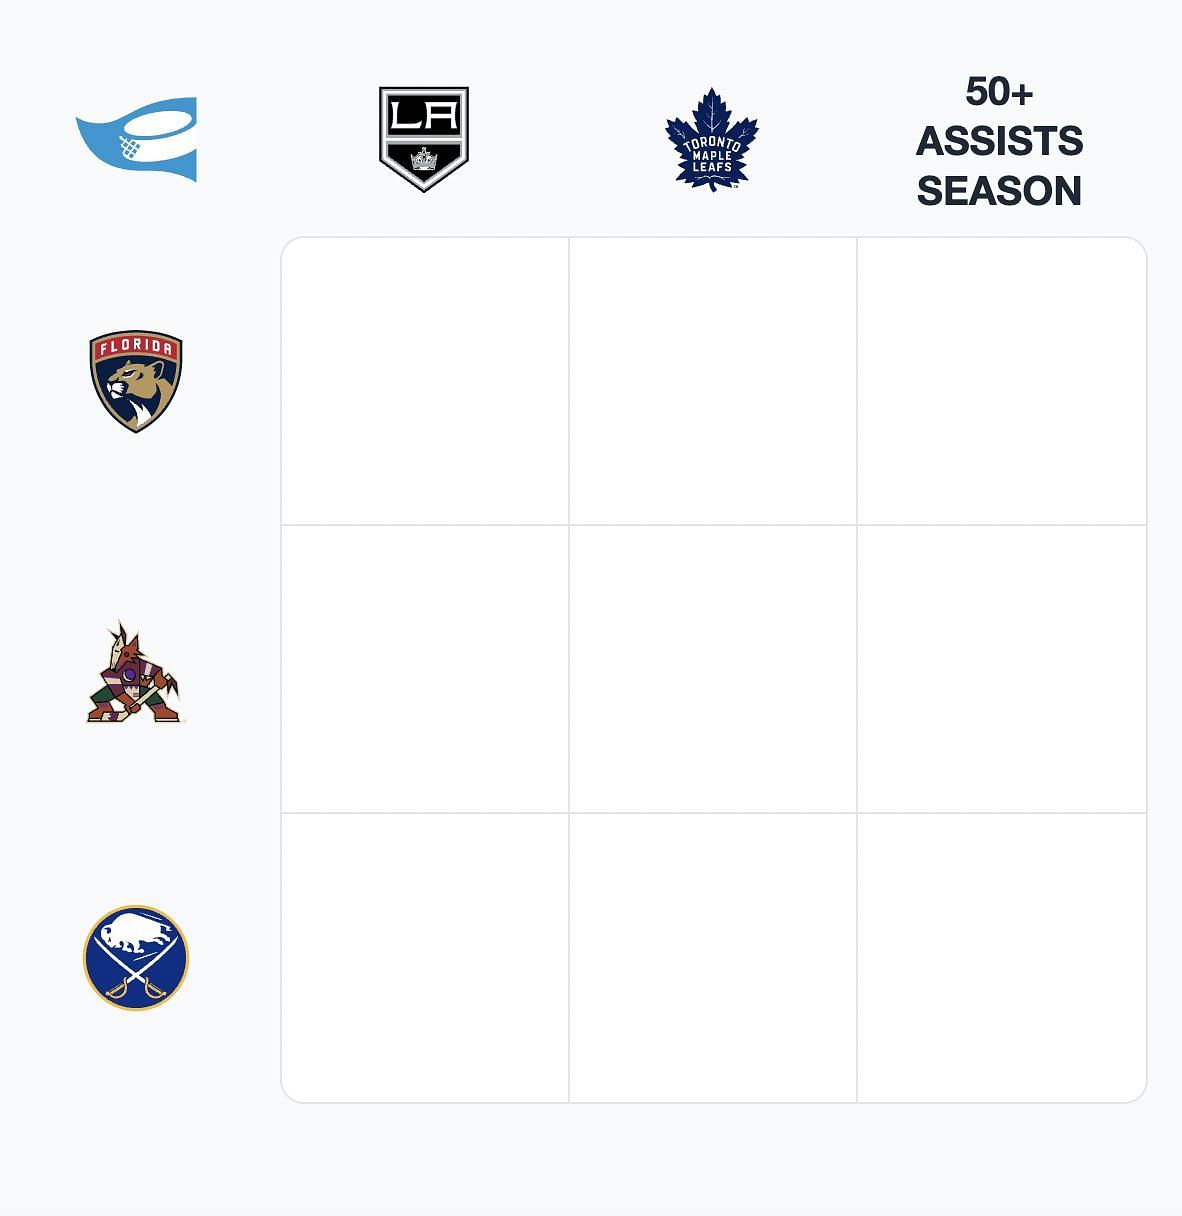 NHL Immaculate Grid answers for August 31